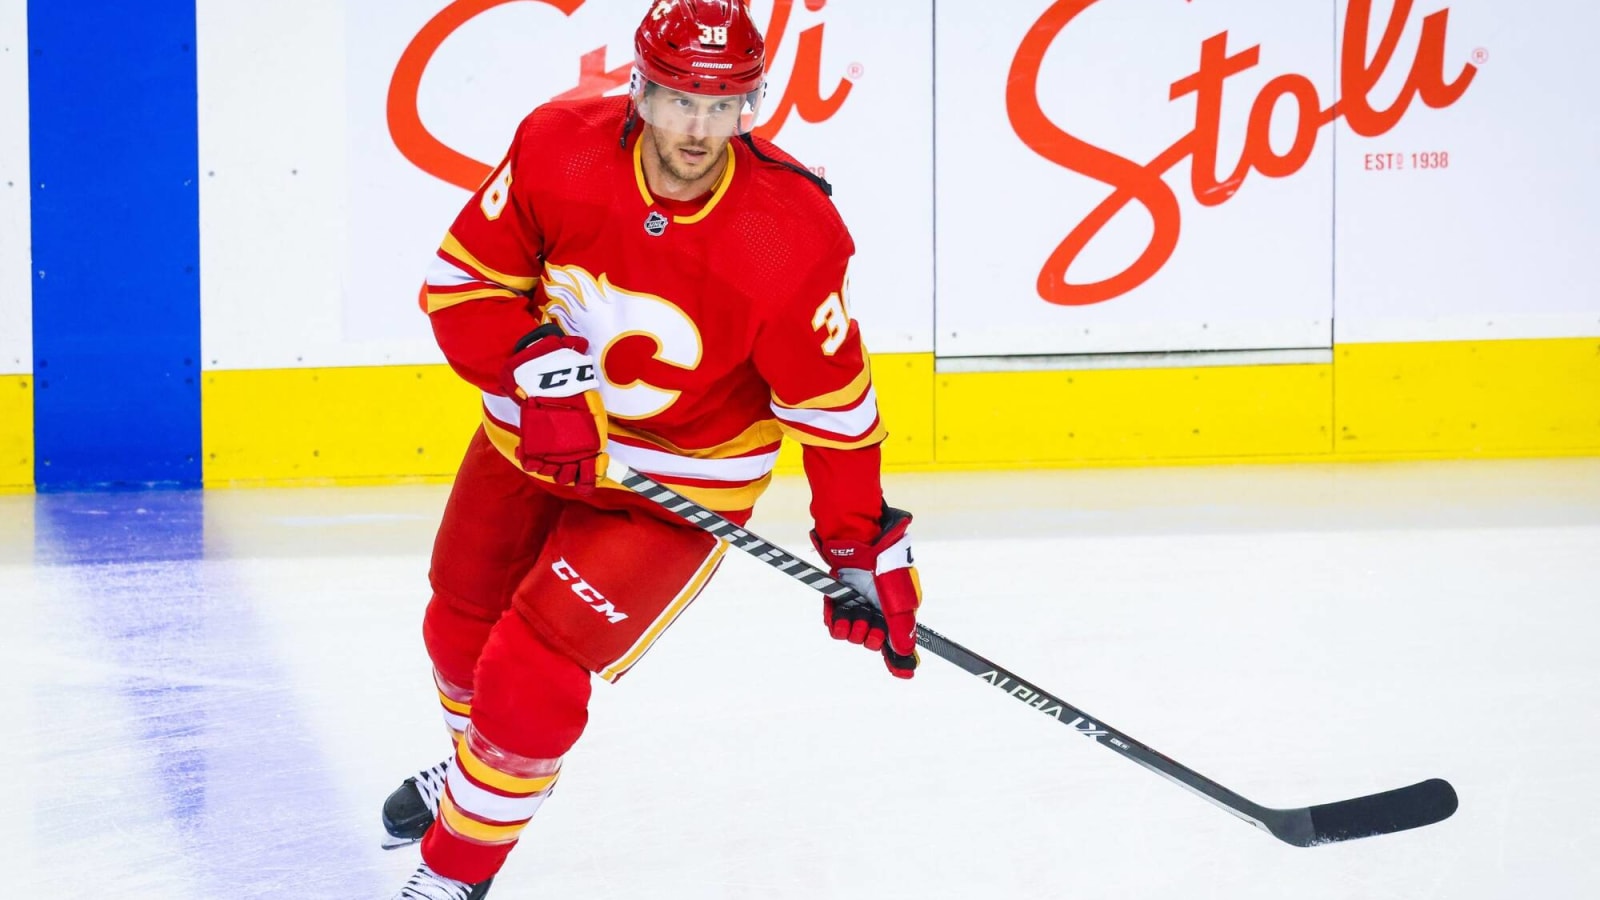 Brett Sutter is the leading (if not only) candidate to be named Calgary Wranglers captain